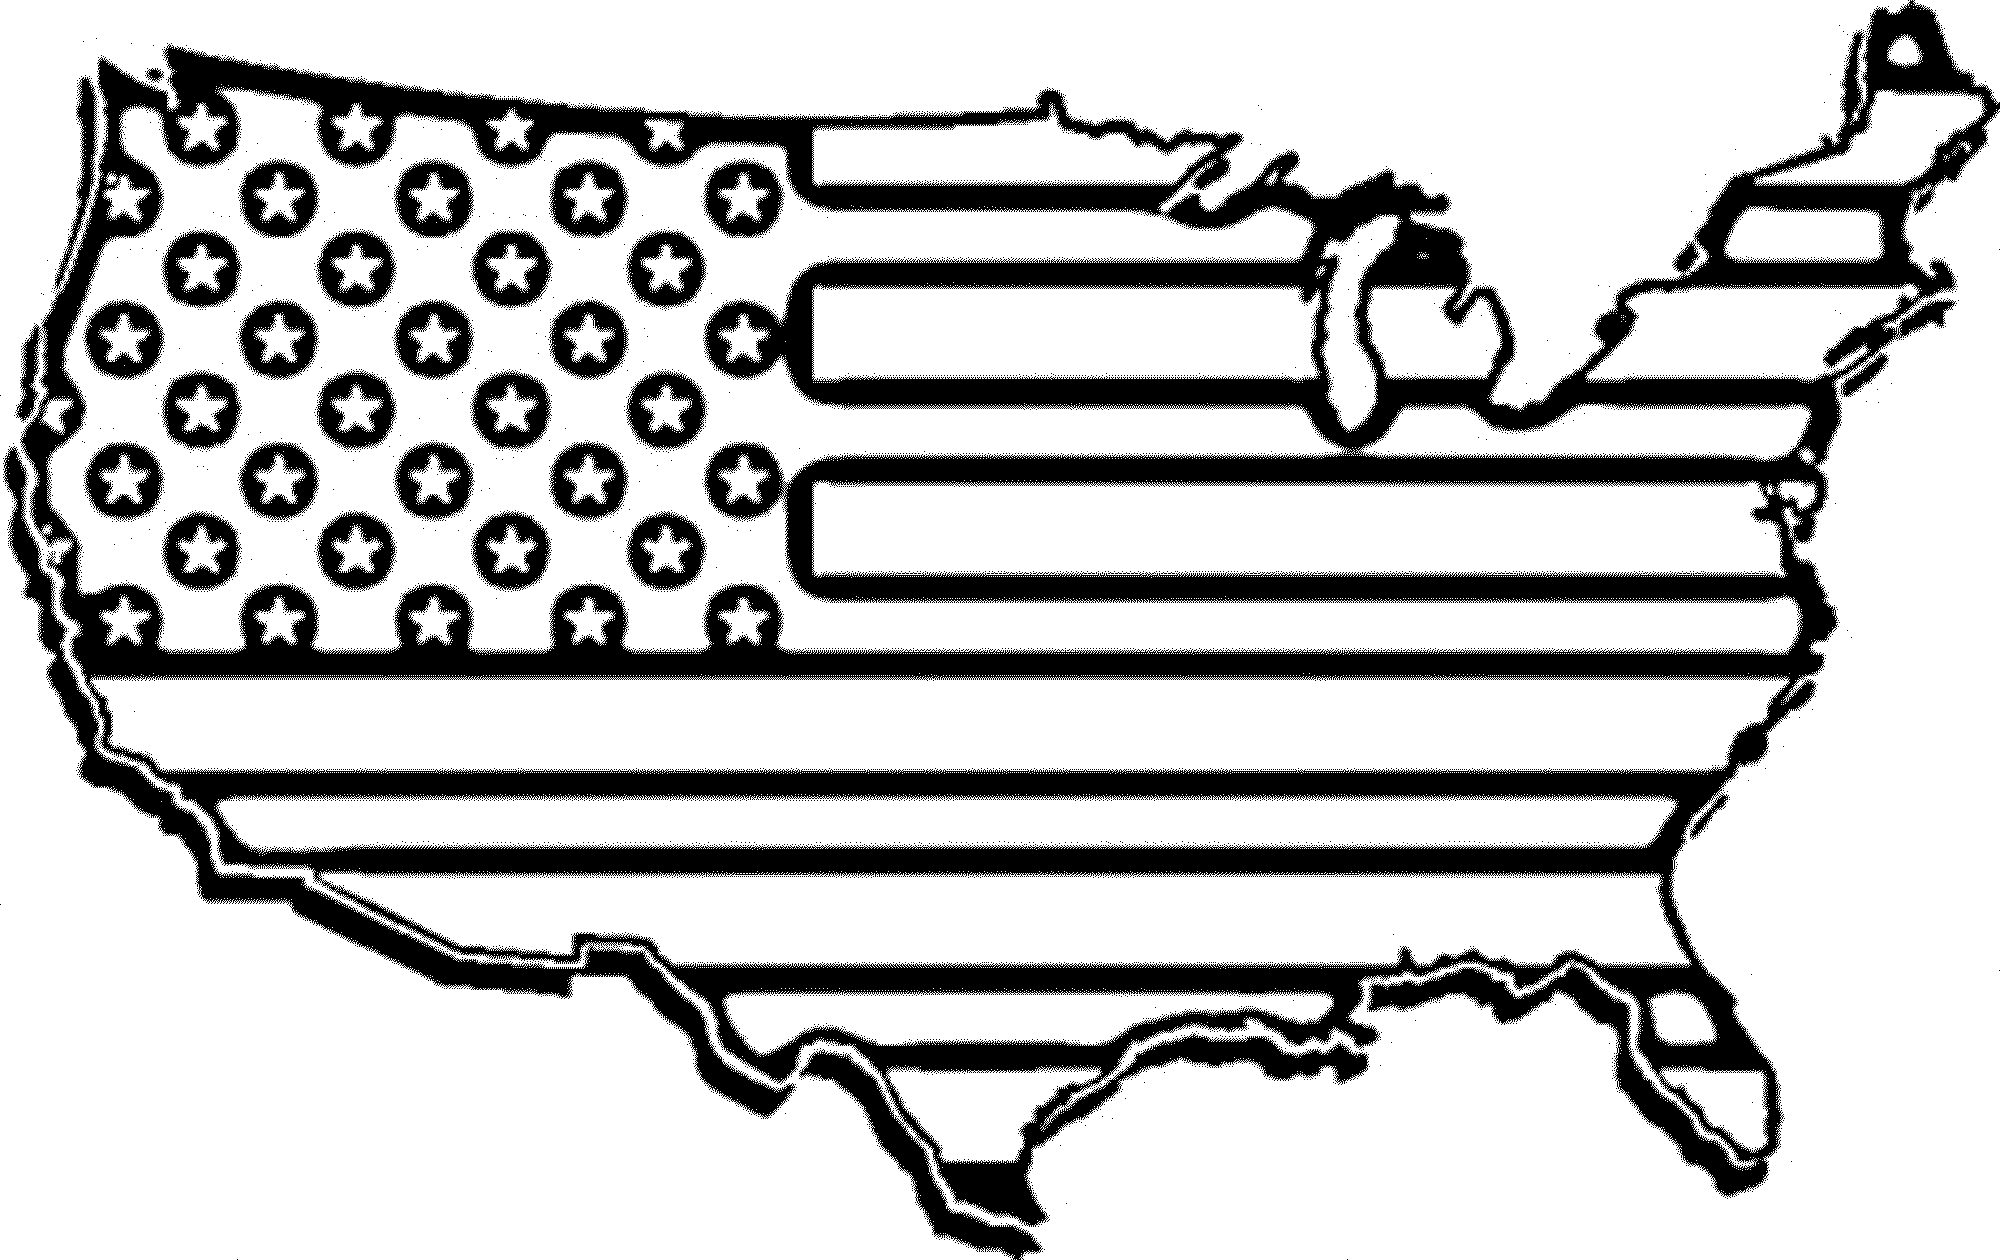 Us flag american flag banner clipart free image